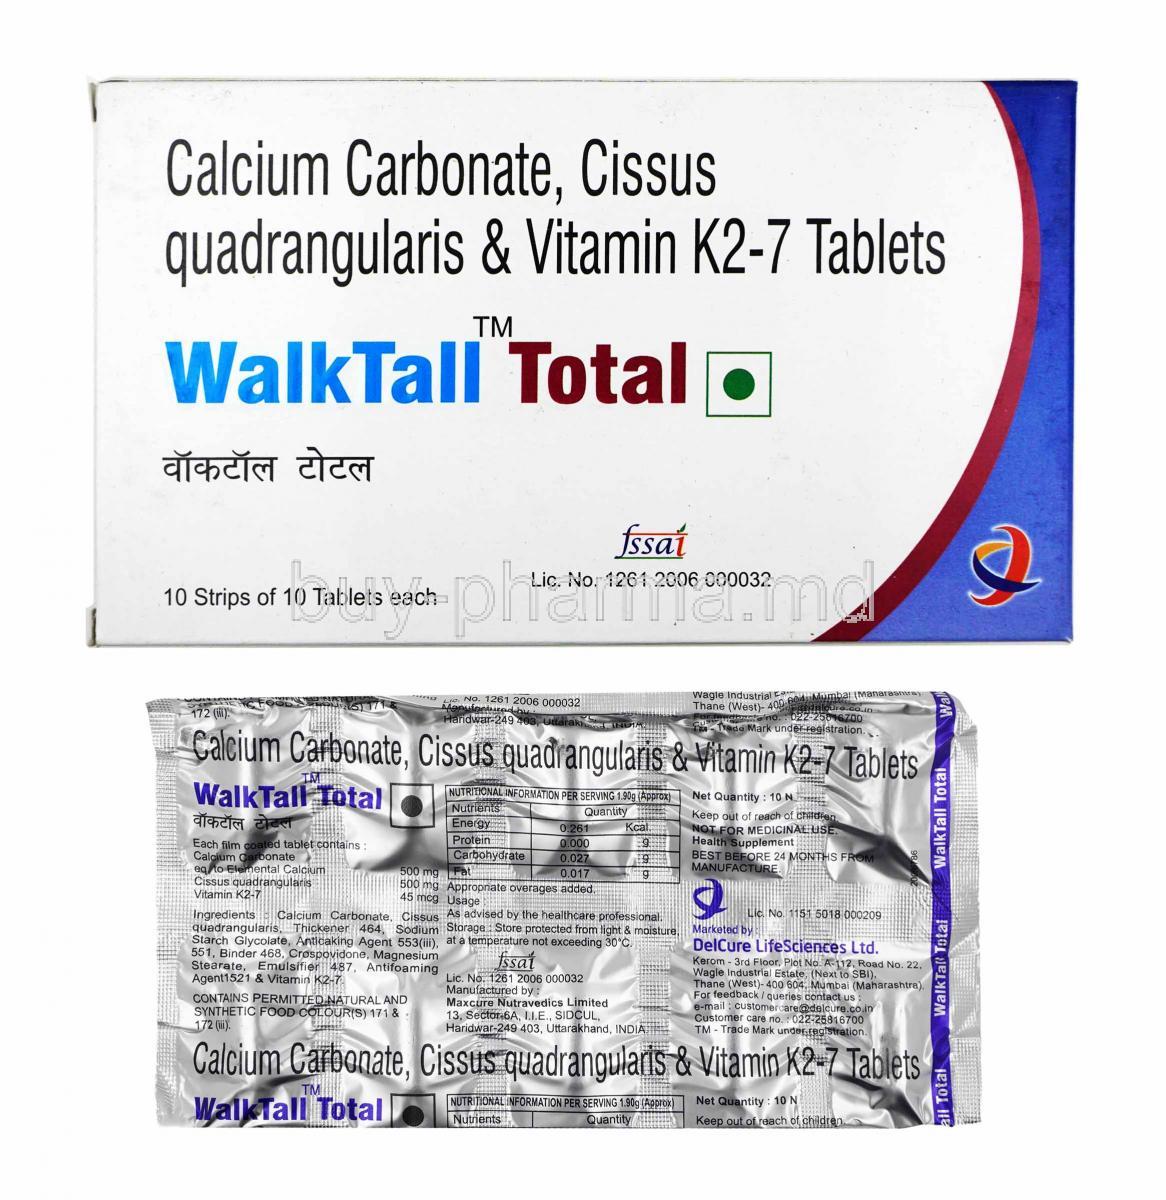 Walktall Total box and tablets